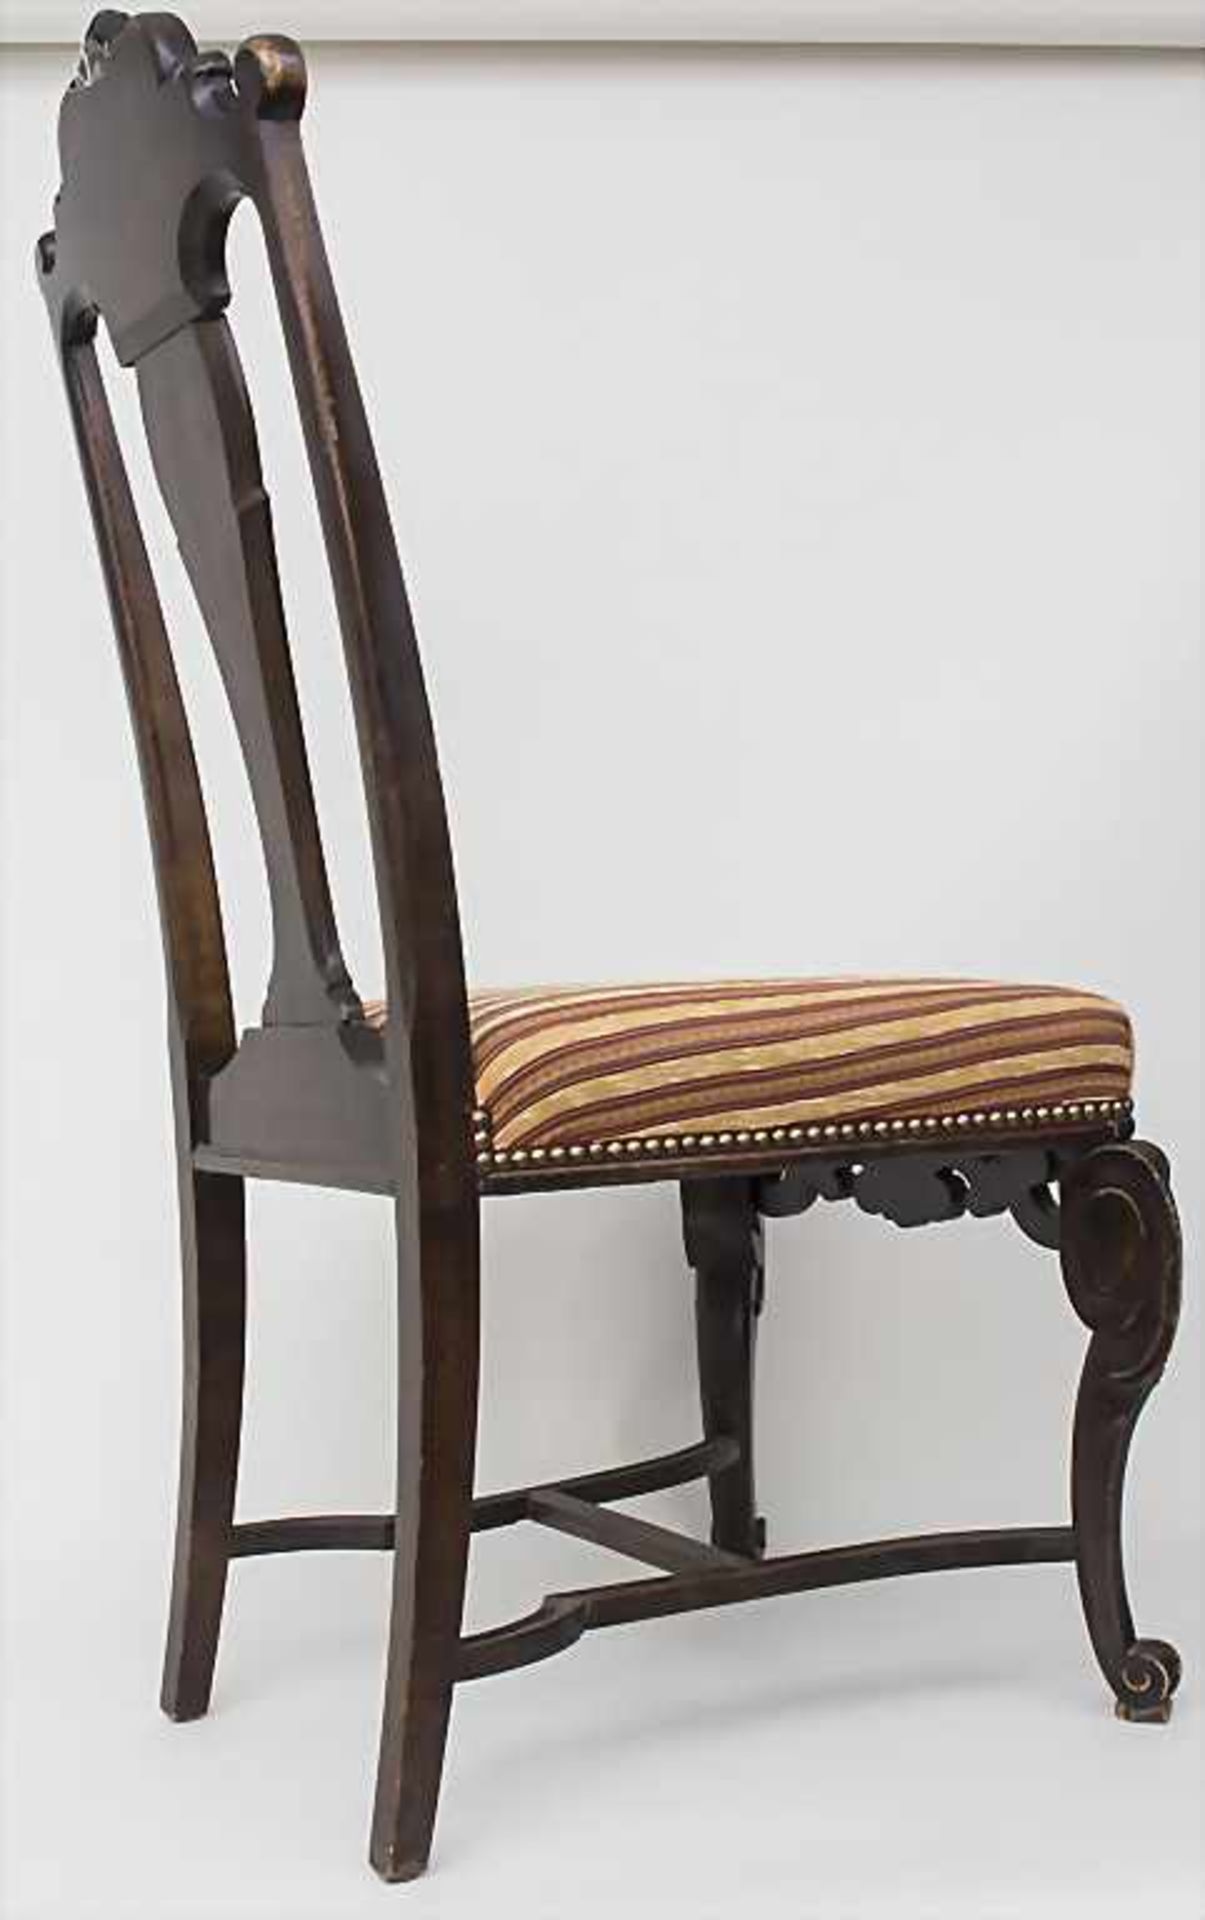 Paar Historismus-Stühle / A pair of historism chairs, 19. Jh.< - Image 3 of 5